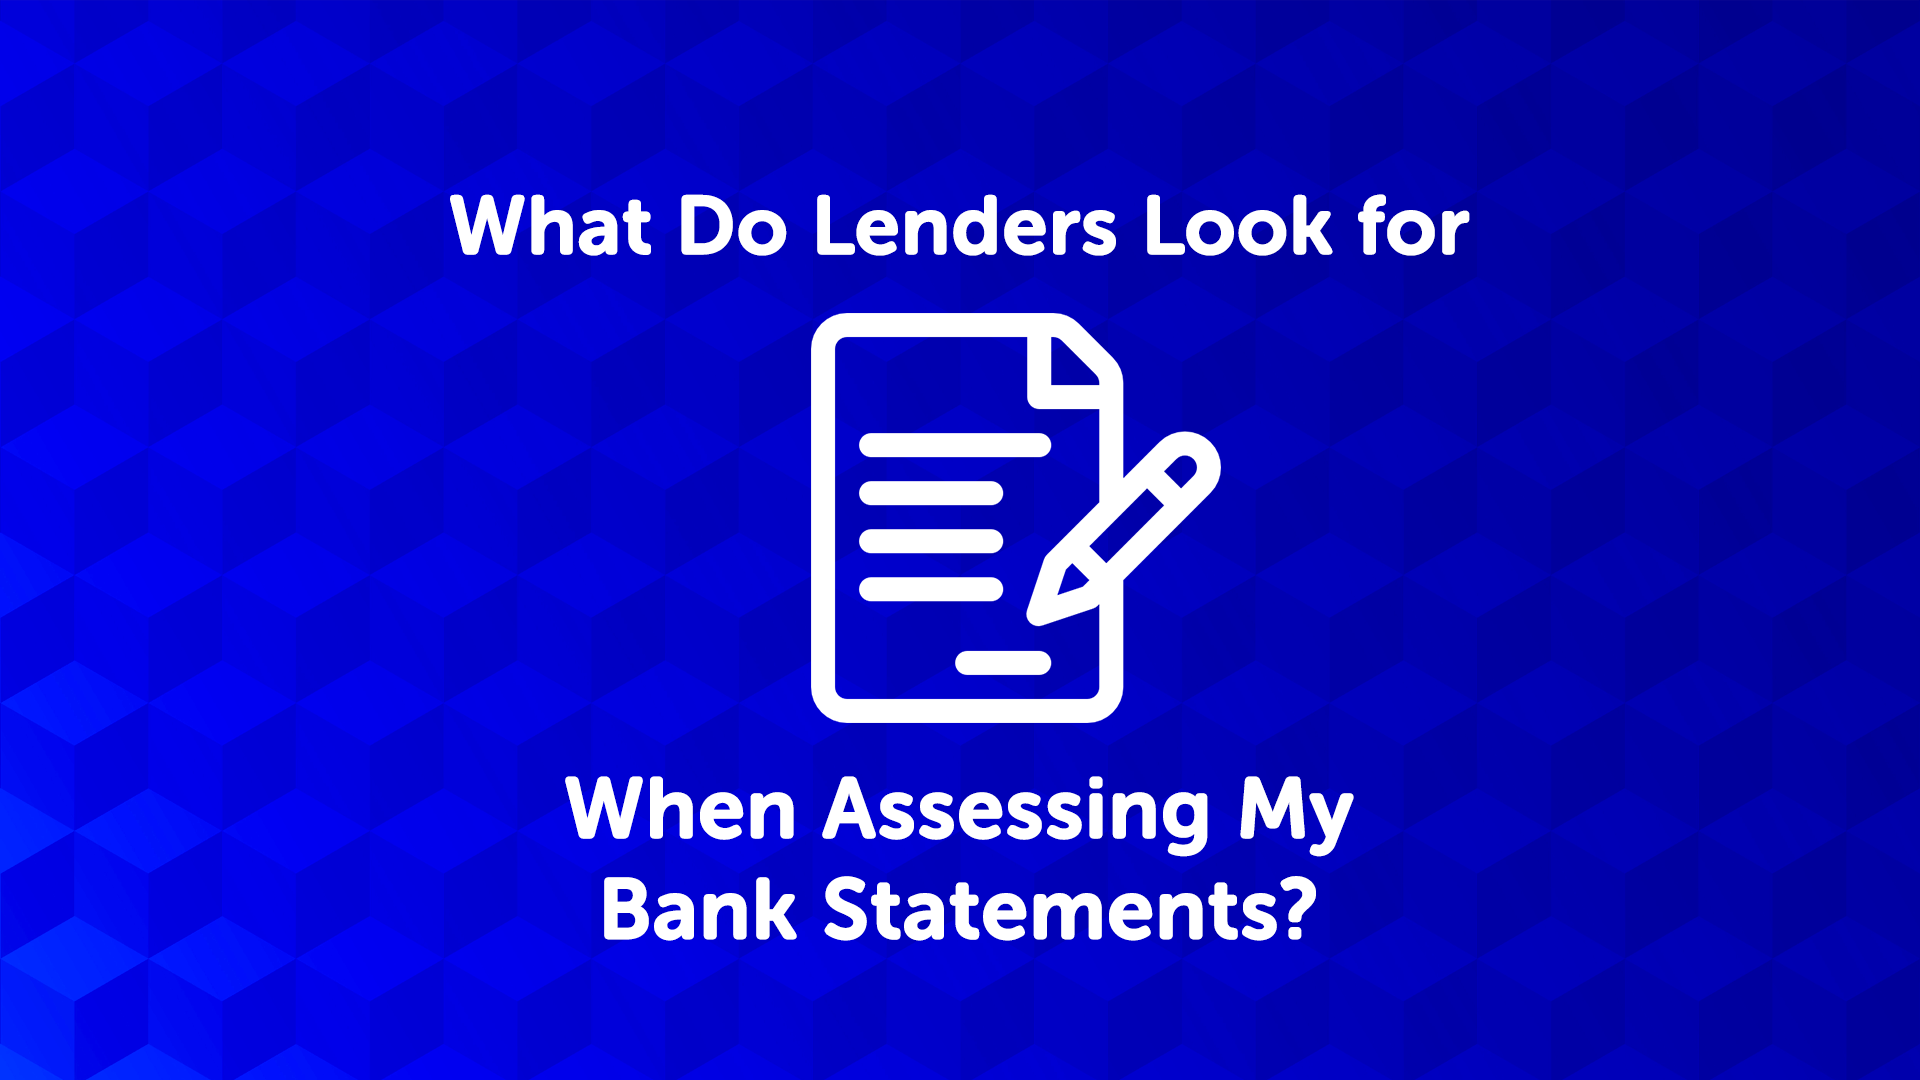 What Do Lenders Look for When Assessing My Bank Statements?